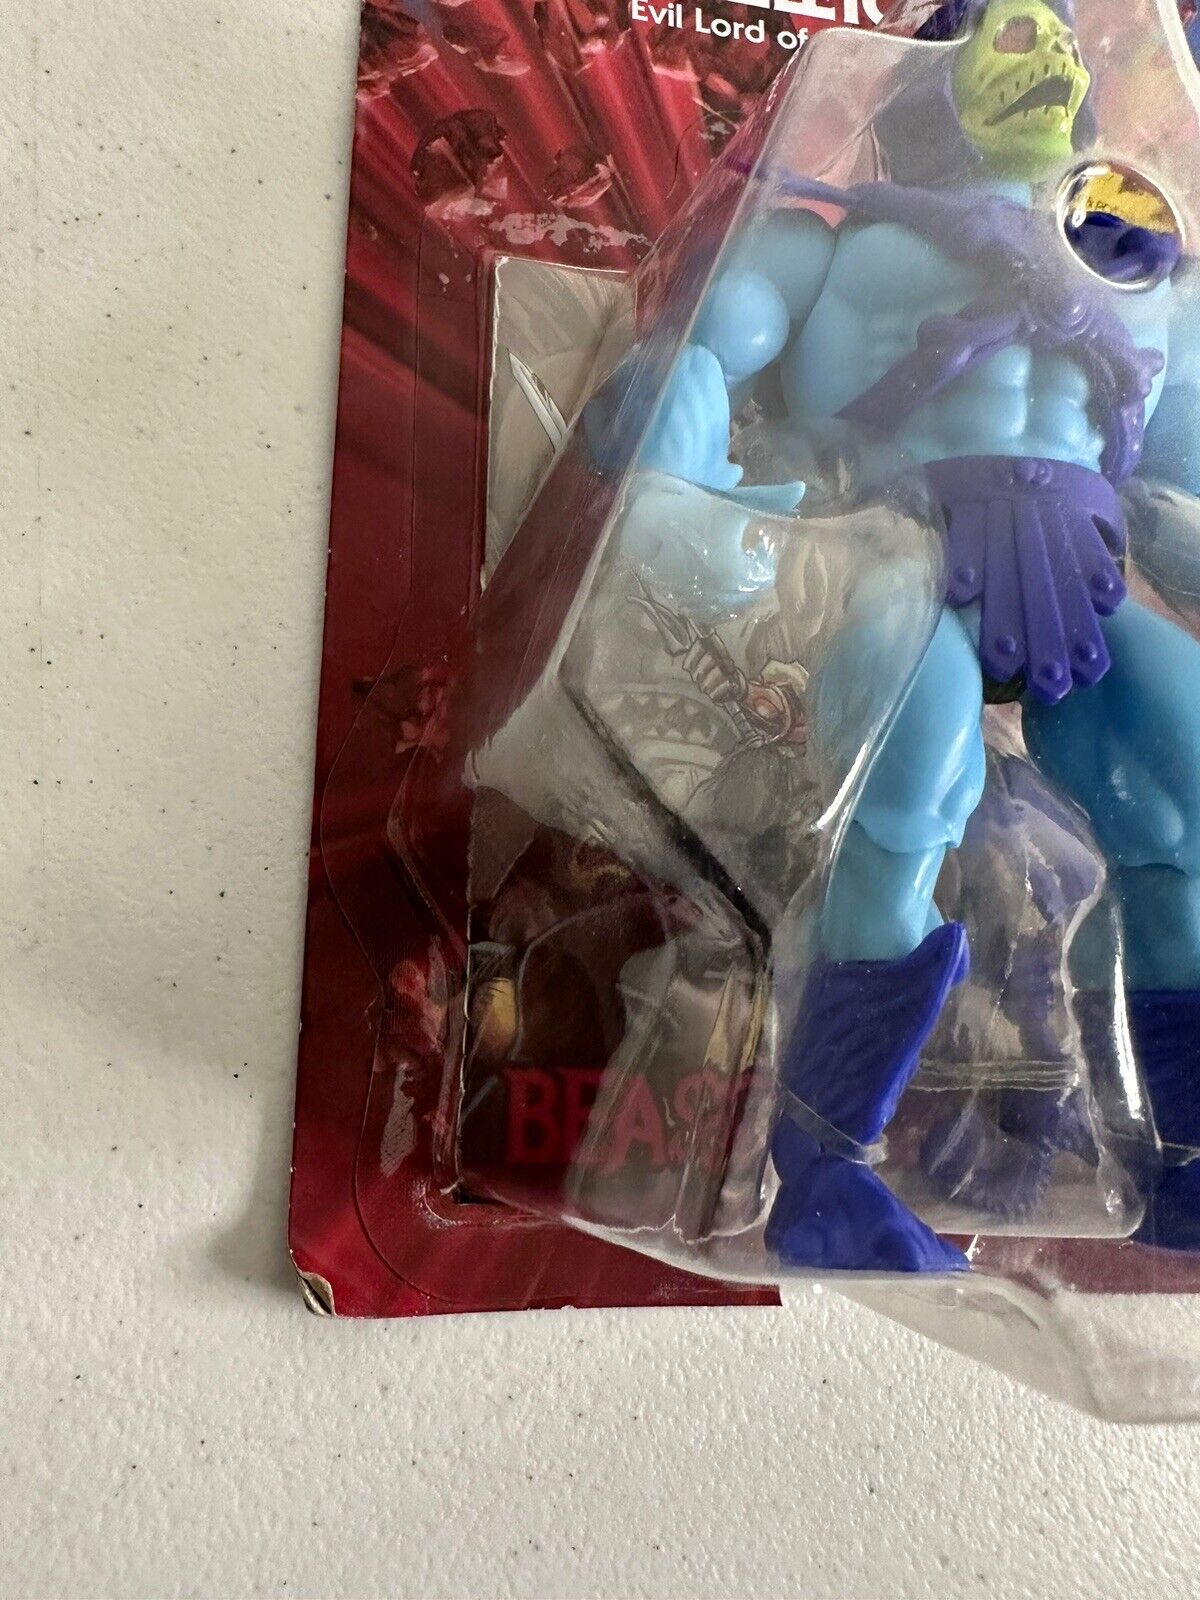 Masters of the Universe Origins Skeletor 5.5" Action Figures - Sealed Lot of 2 - TreasuTiques